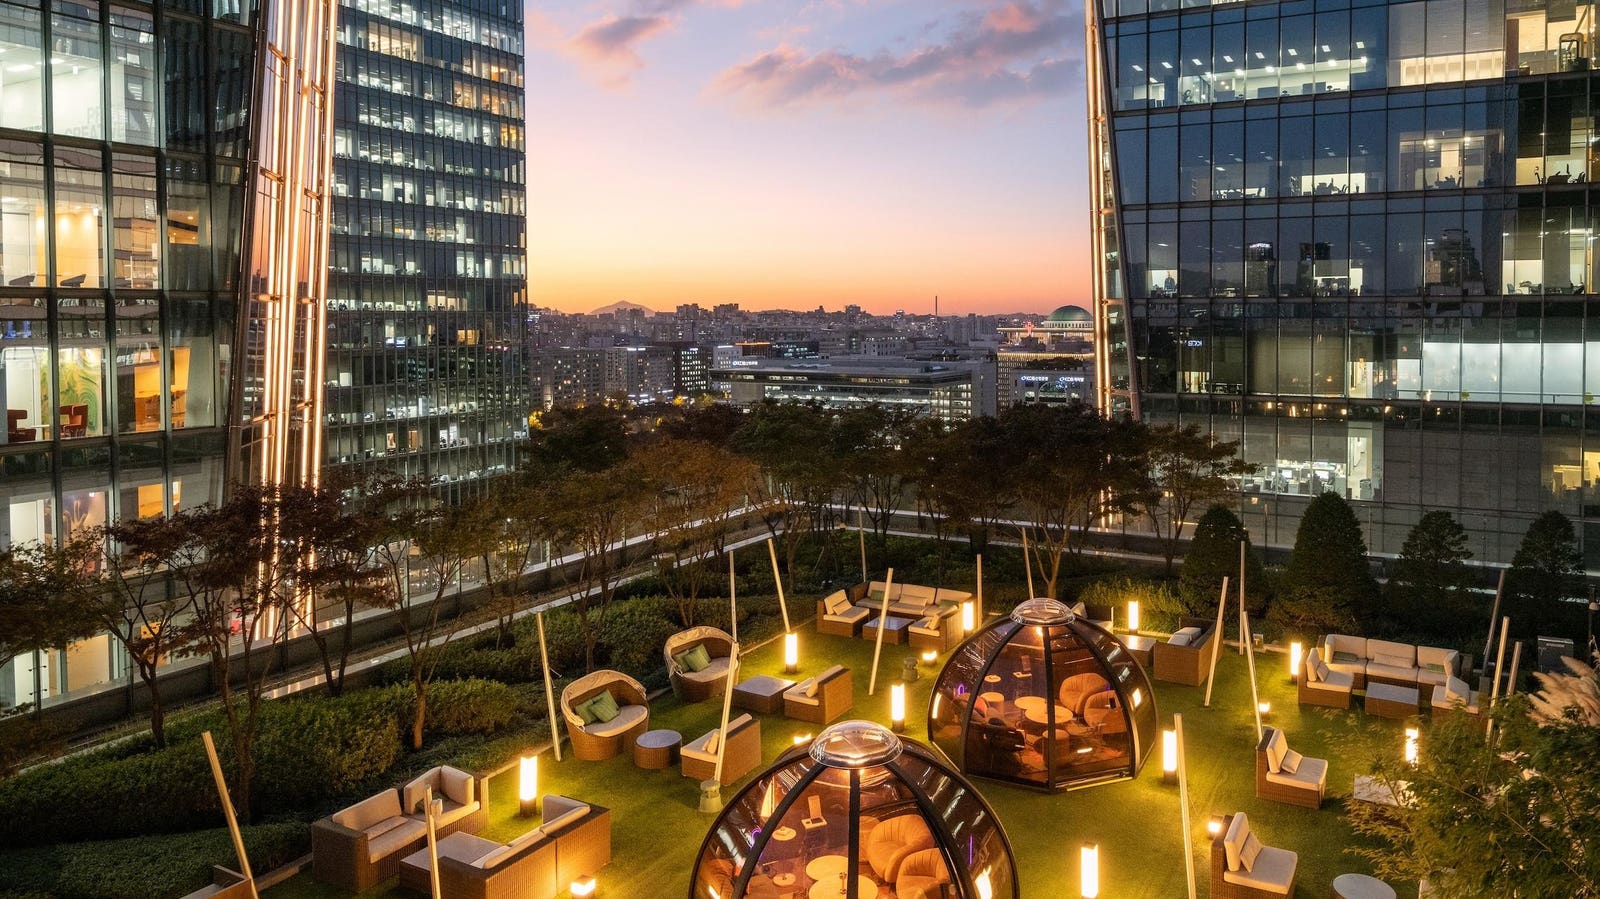 Conrad Seoul Is Great For Business and Leisure Travelers